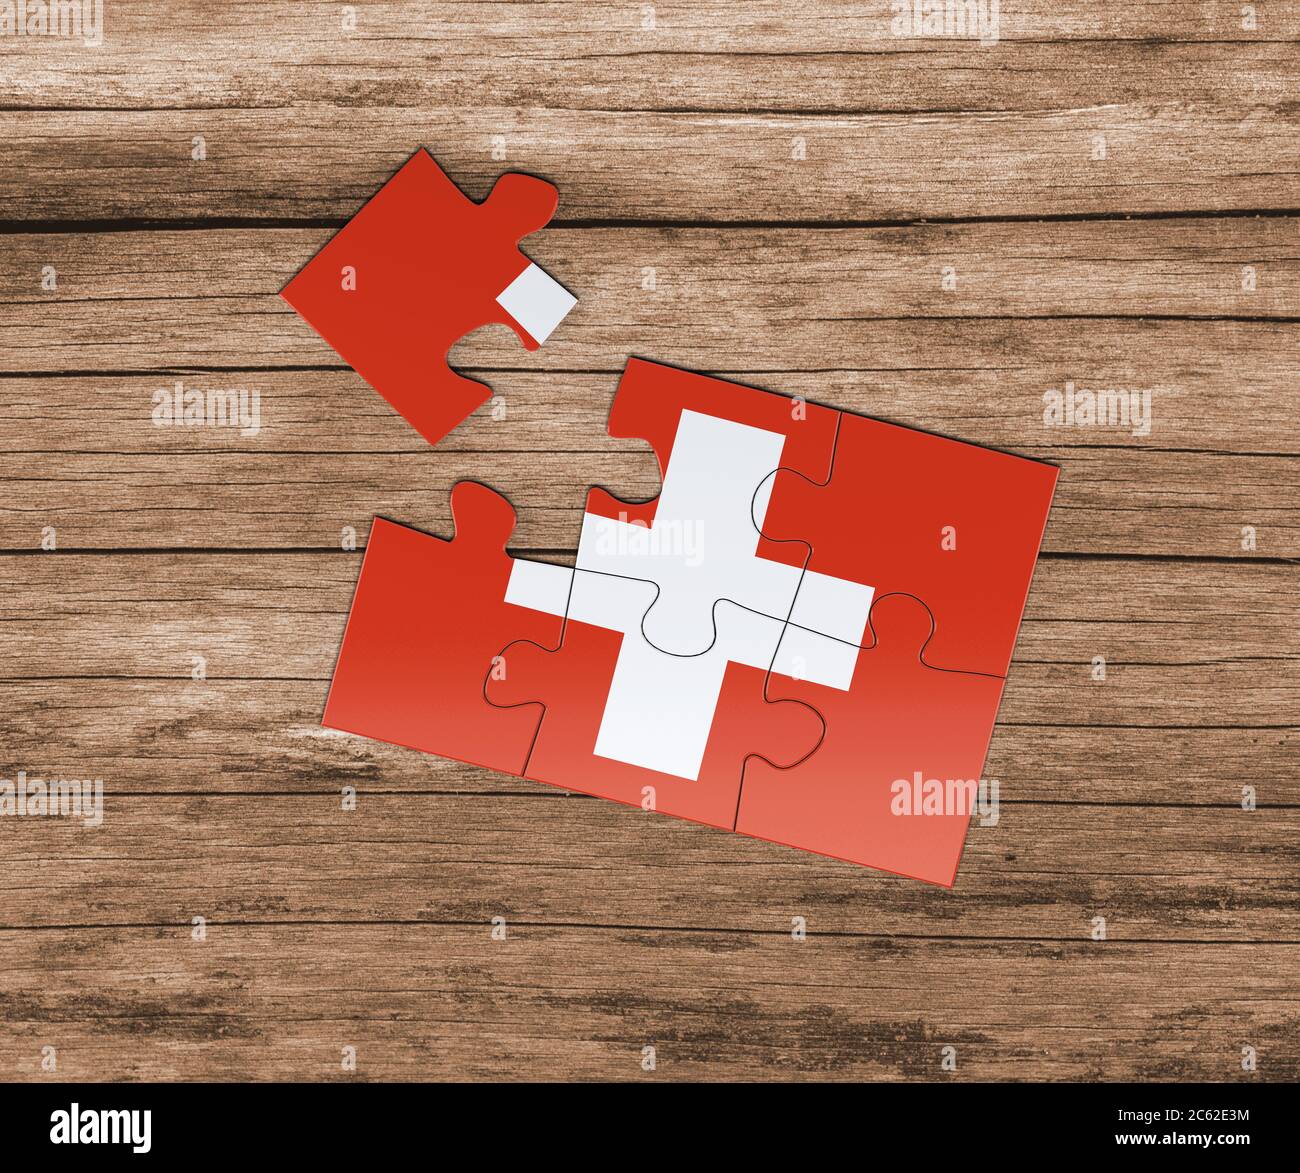 Switzerland national flag on jigsaw puzzle. One piece is missing. Danger  concept Stock Photo - Alamy